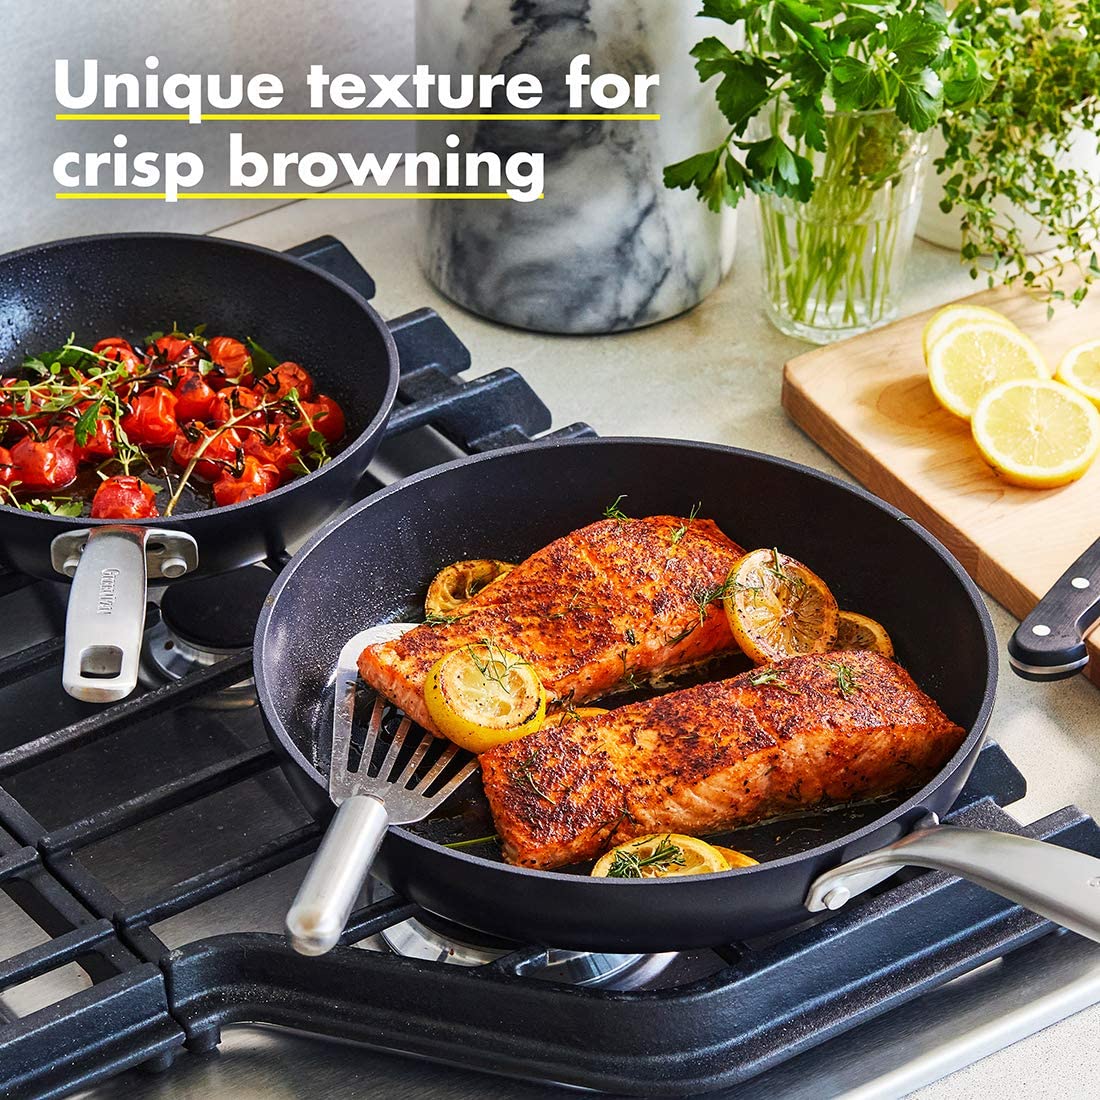 Ceramic Nonstick Cookware Reviews - The Pros & The Cons